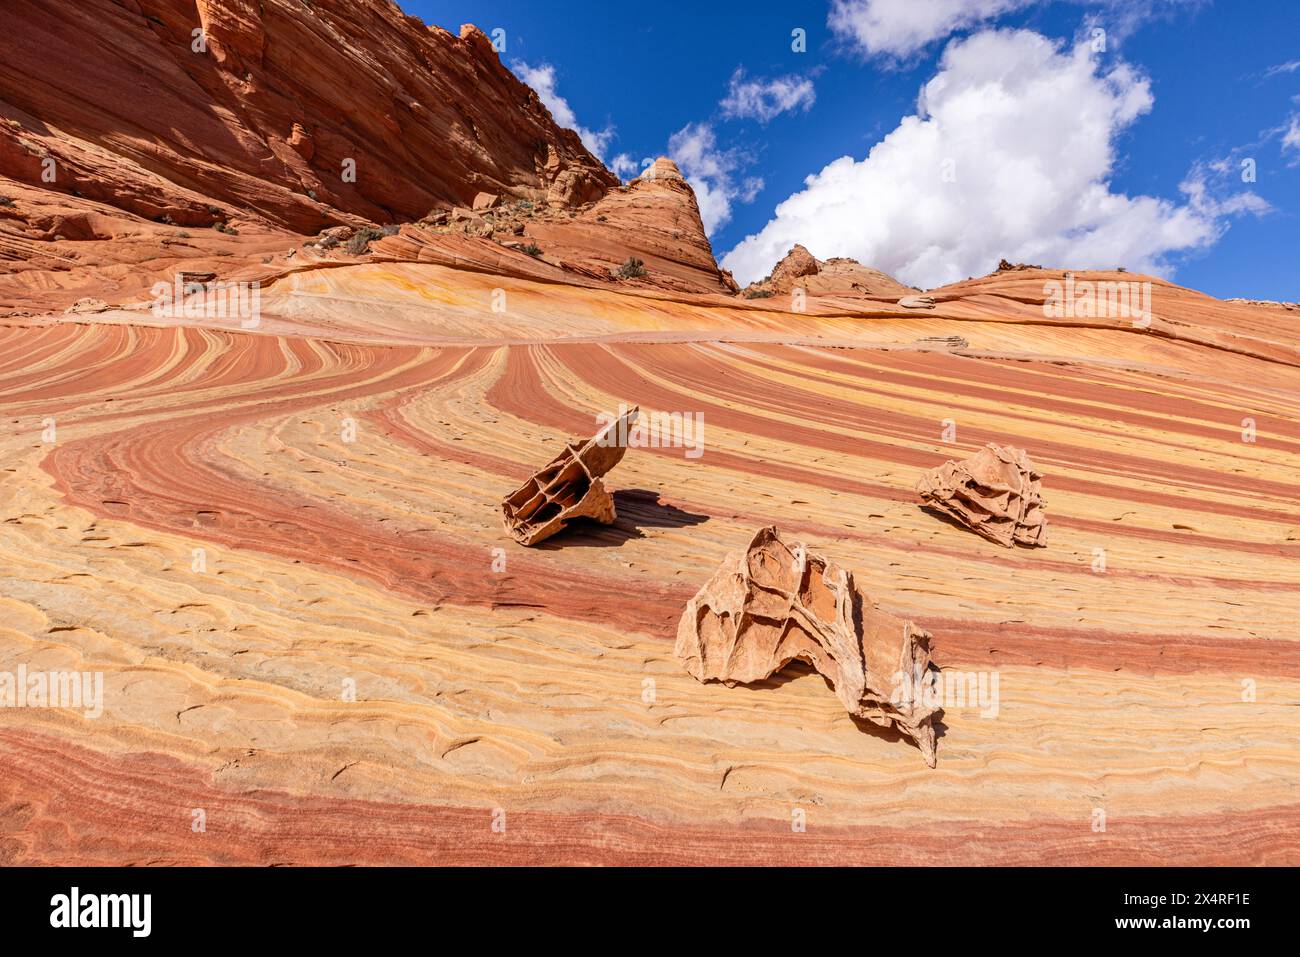 Fatali's Boneyard fossils near the Wave, Coyote Buttes North at Paria Canyon, Vermilion Cliffs National Monument, Arizona, USA Stock Photo